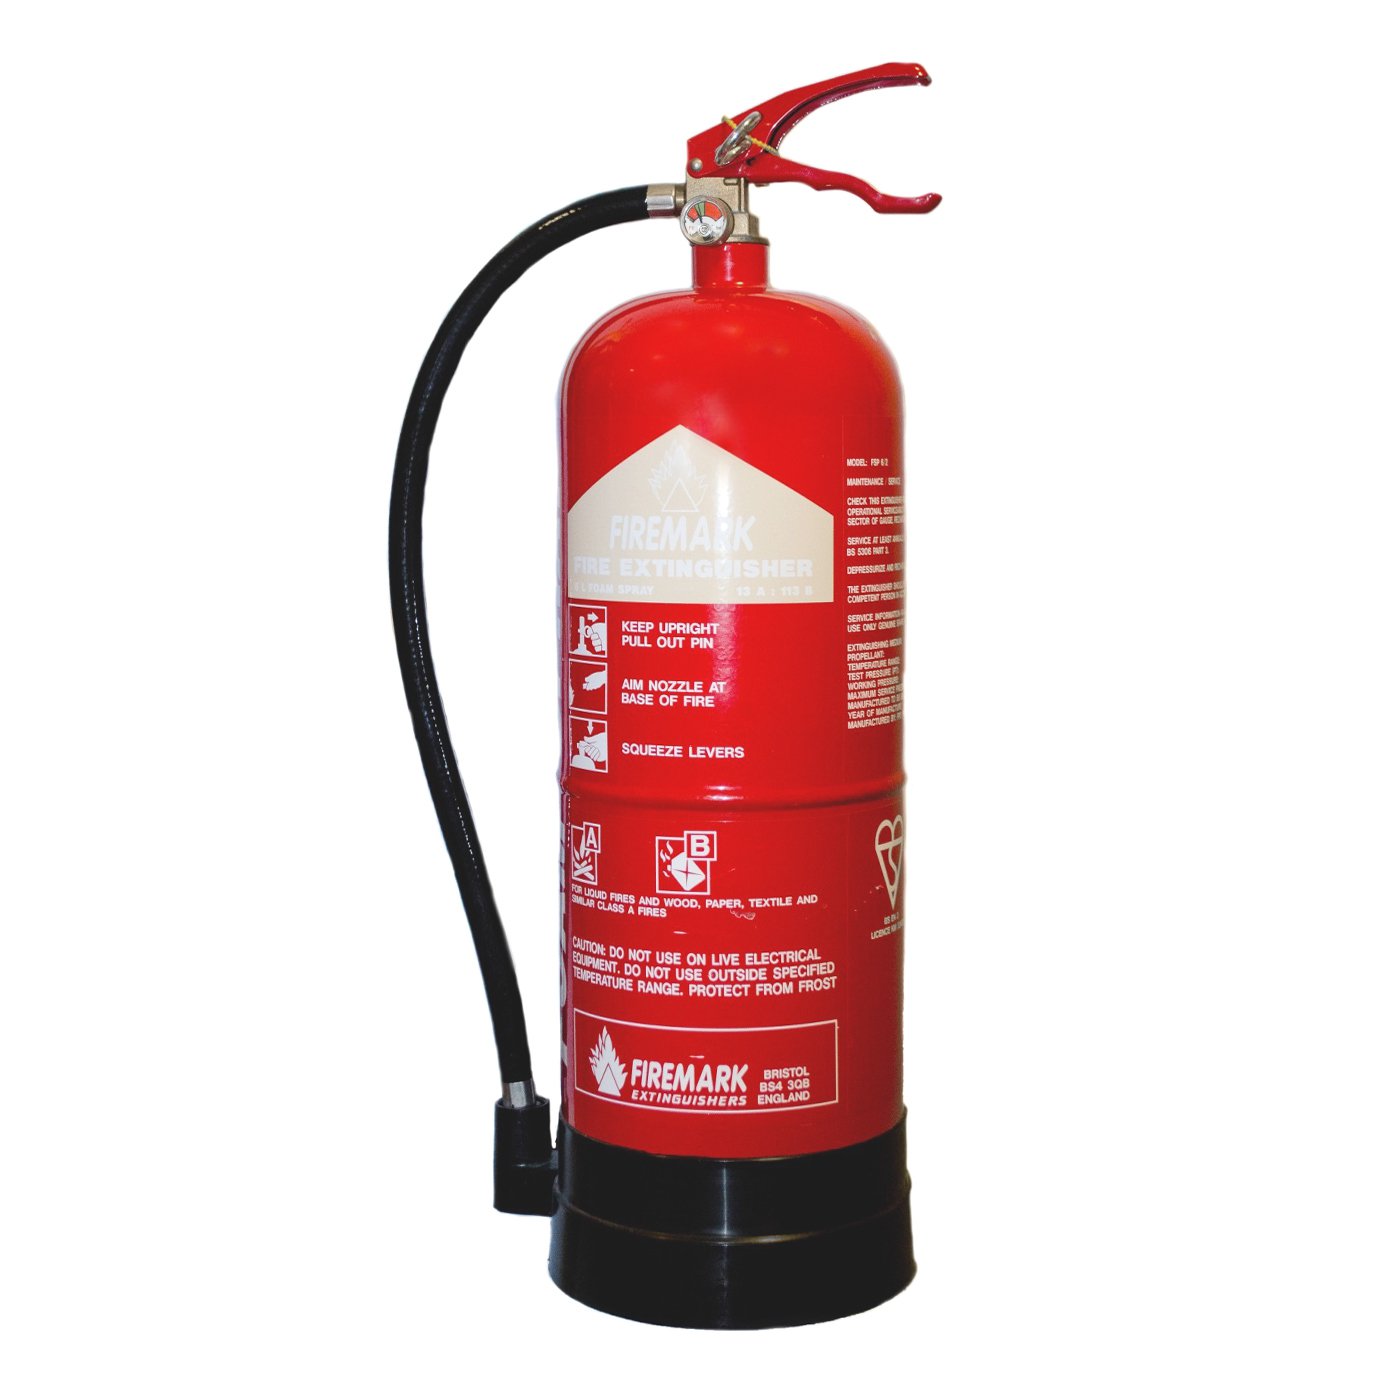 Car fire extinguisher We Buy Any Electric Vehicles